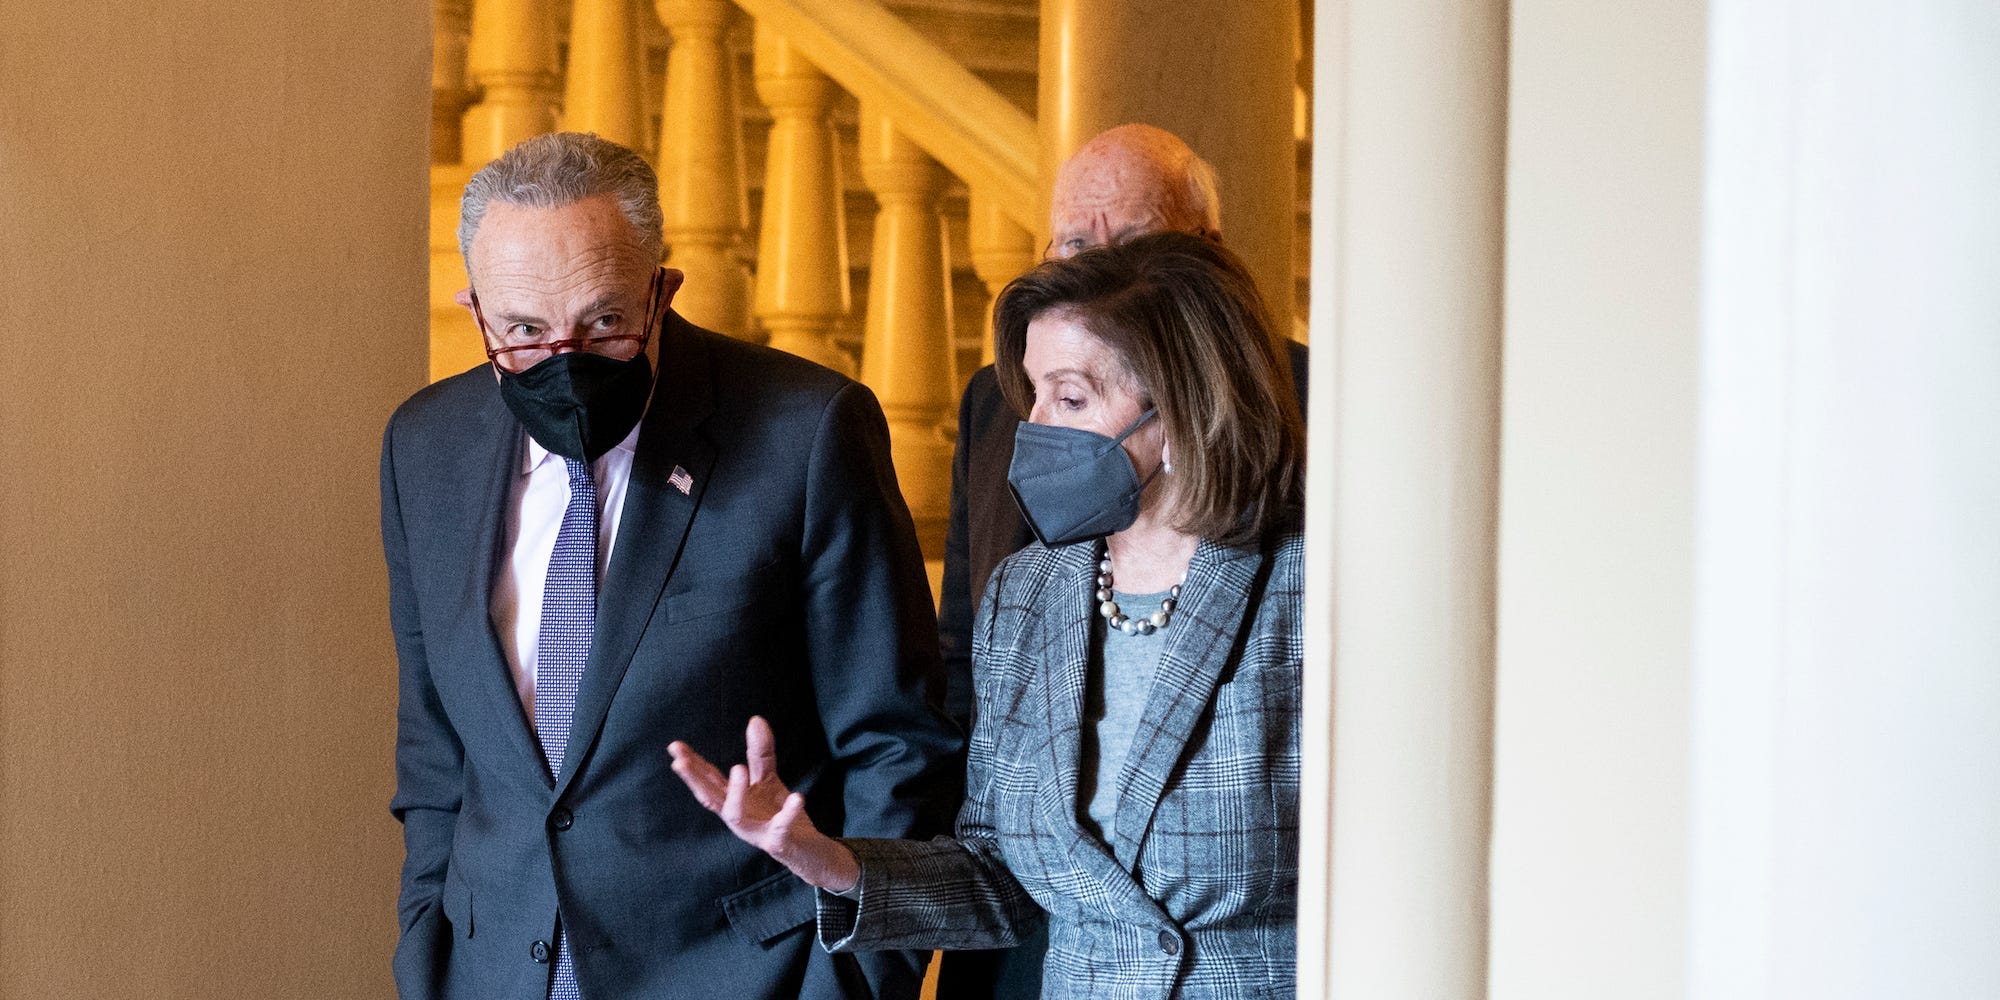 Senate Majority Leader Chuck Schumer of New York and House Speaker Nancy Pelosi of California at the US Capitol on February 1, 2022.